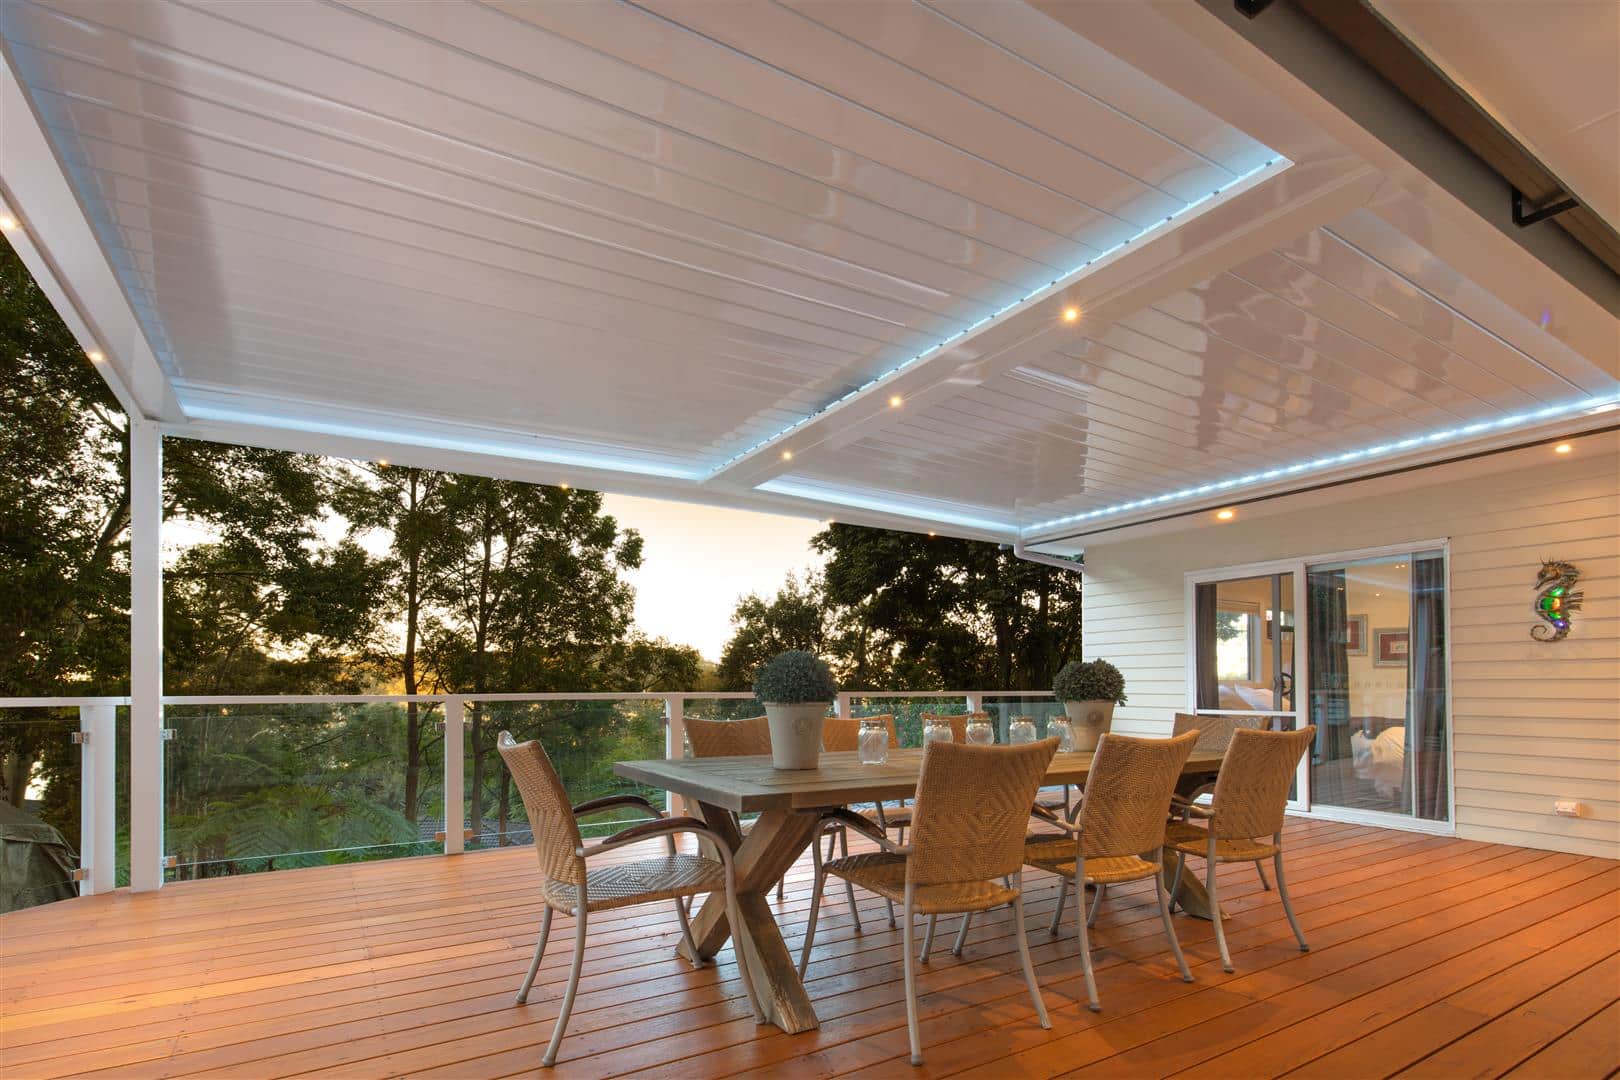 Closed louvres on the Bayview pergola deck.